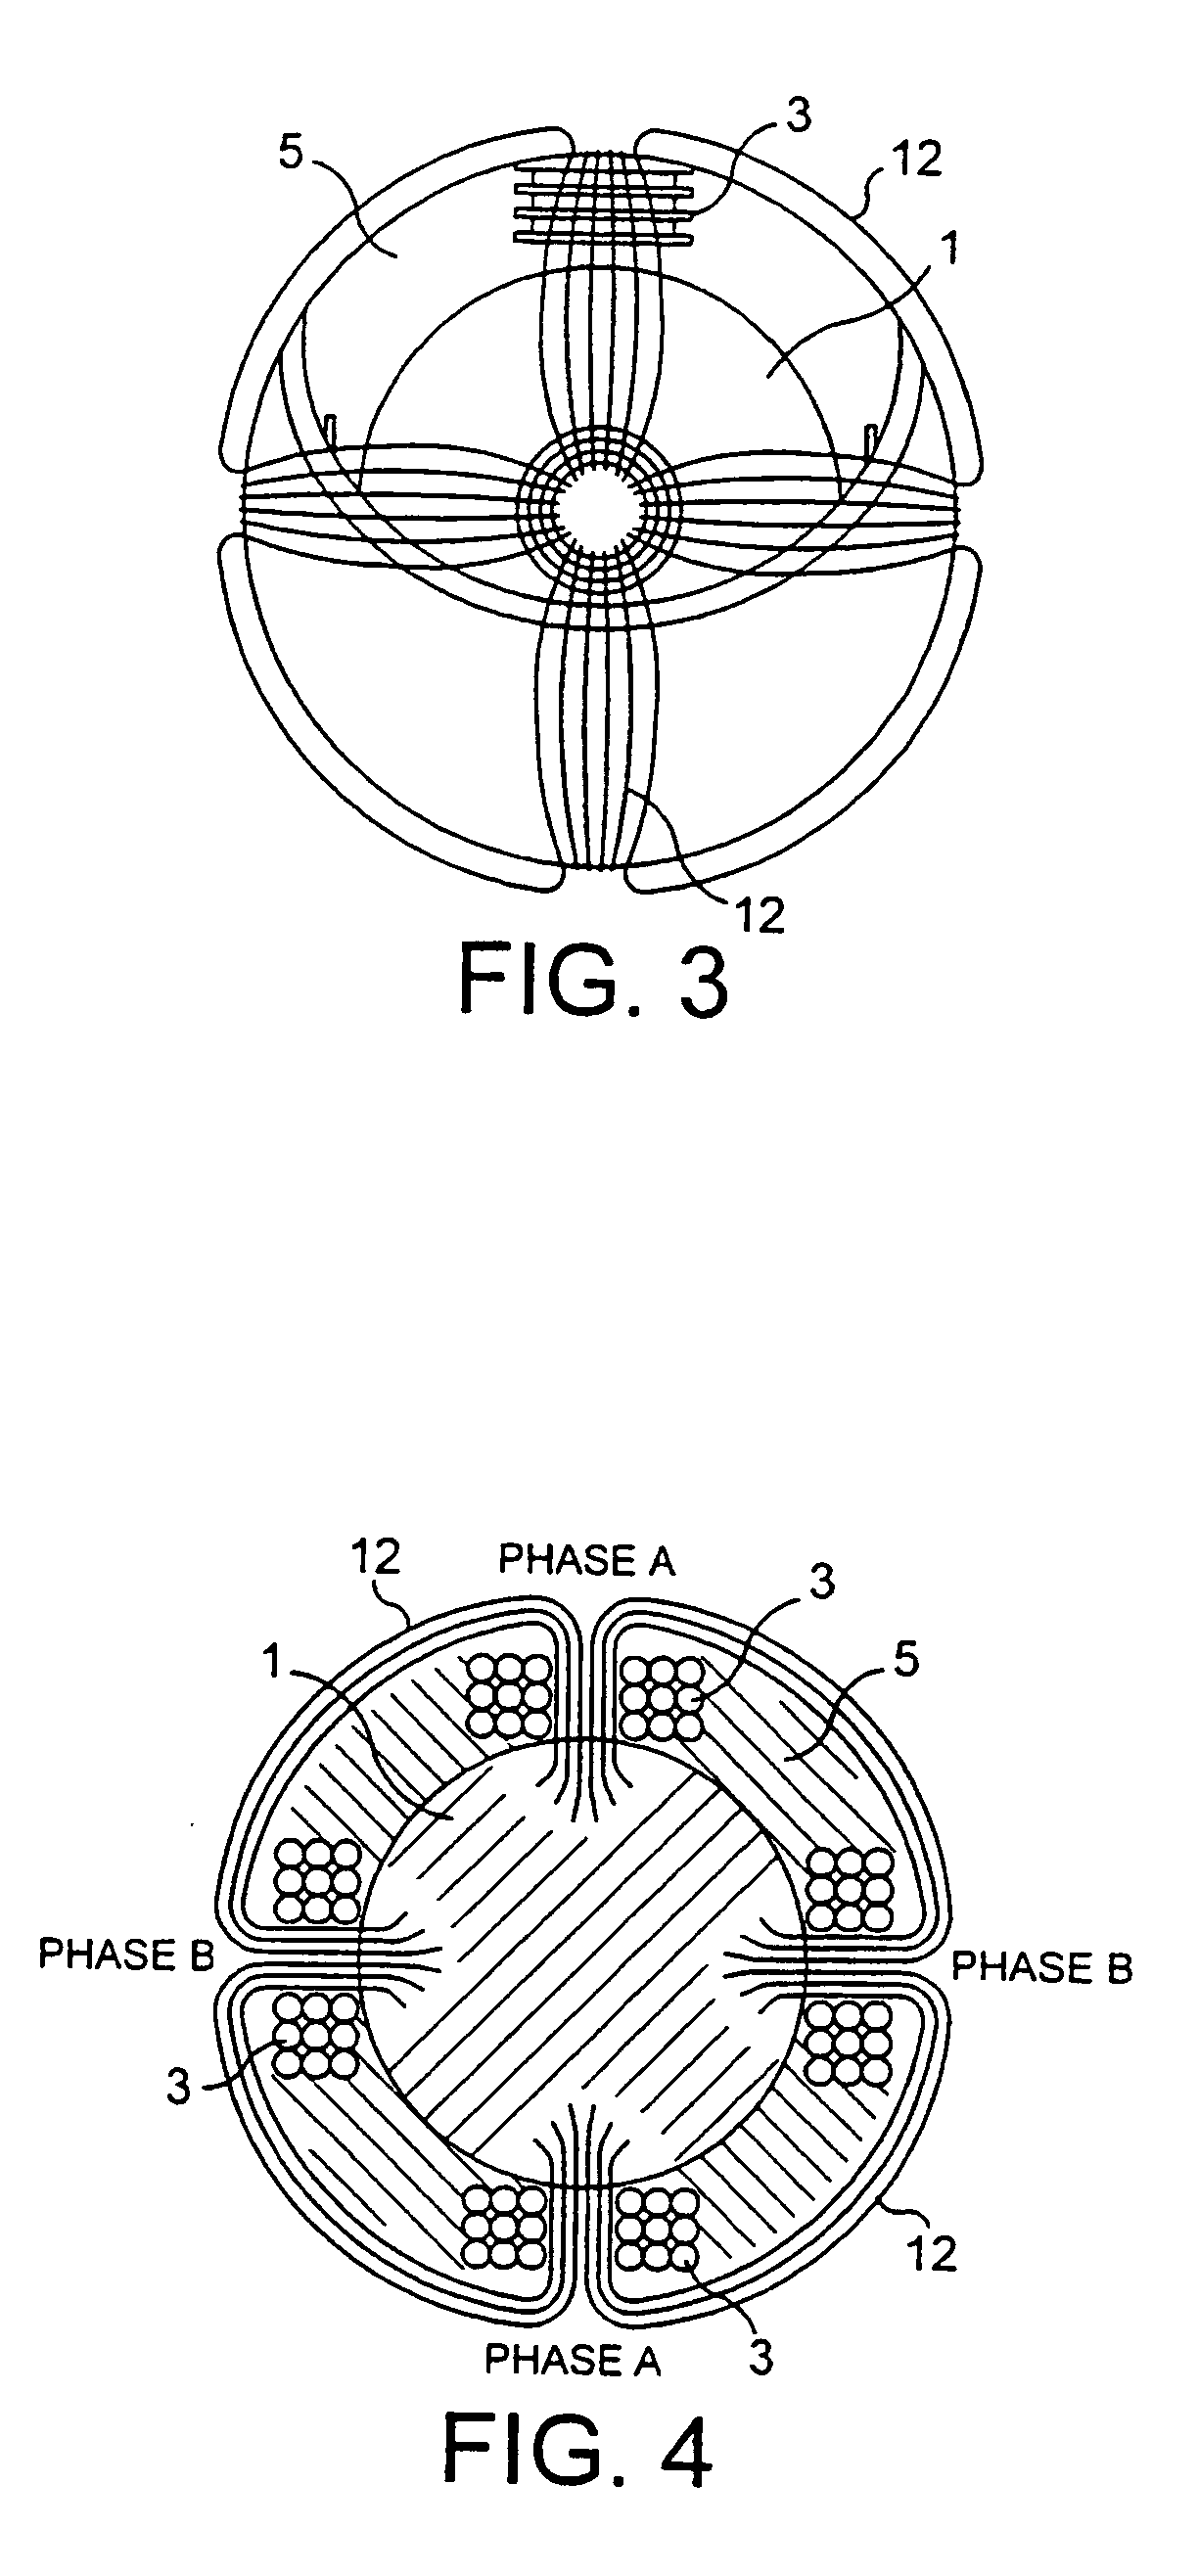 Multiphase induction device